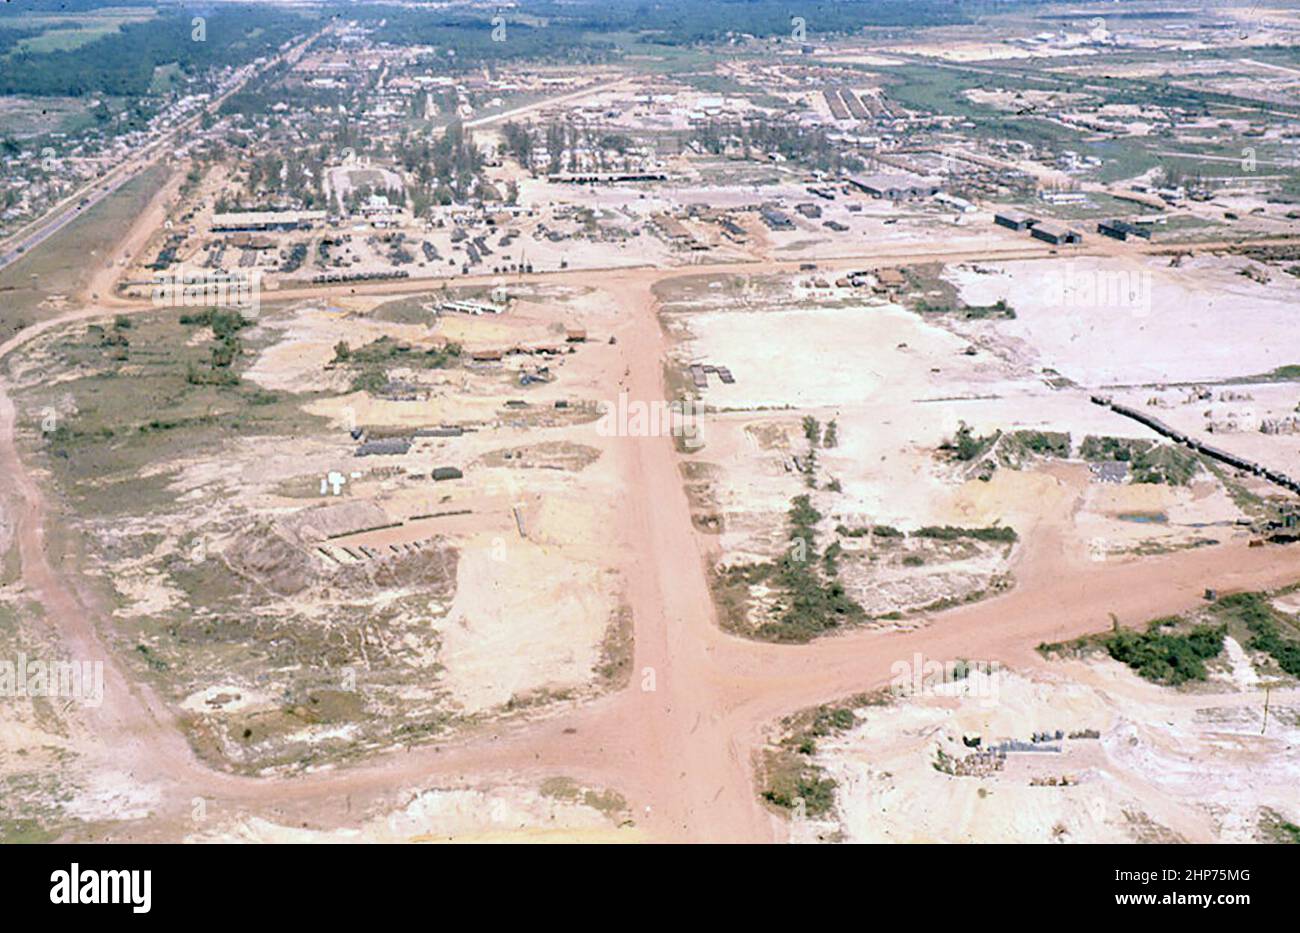 Aerial view of the Force Logistics Support Group, 3d MAF, and 3d MAW Headquarters taken from the south of DaNang looking north - September 1965 - PD Photo Courtesy of USMC Stock Photo